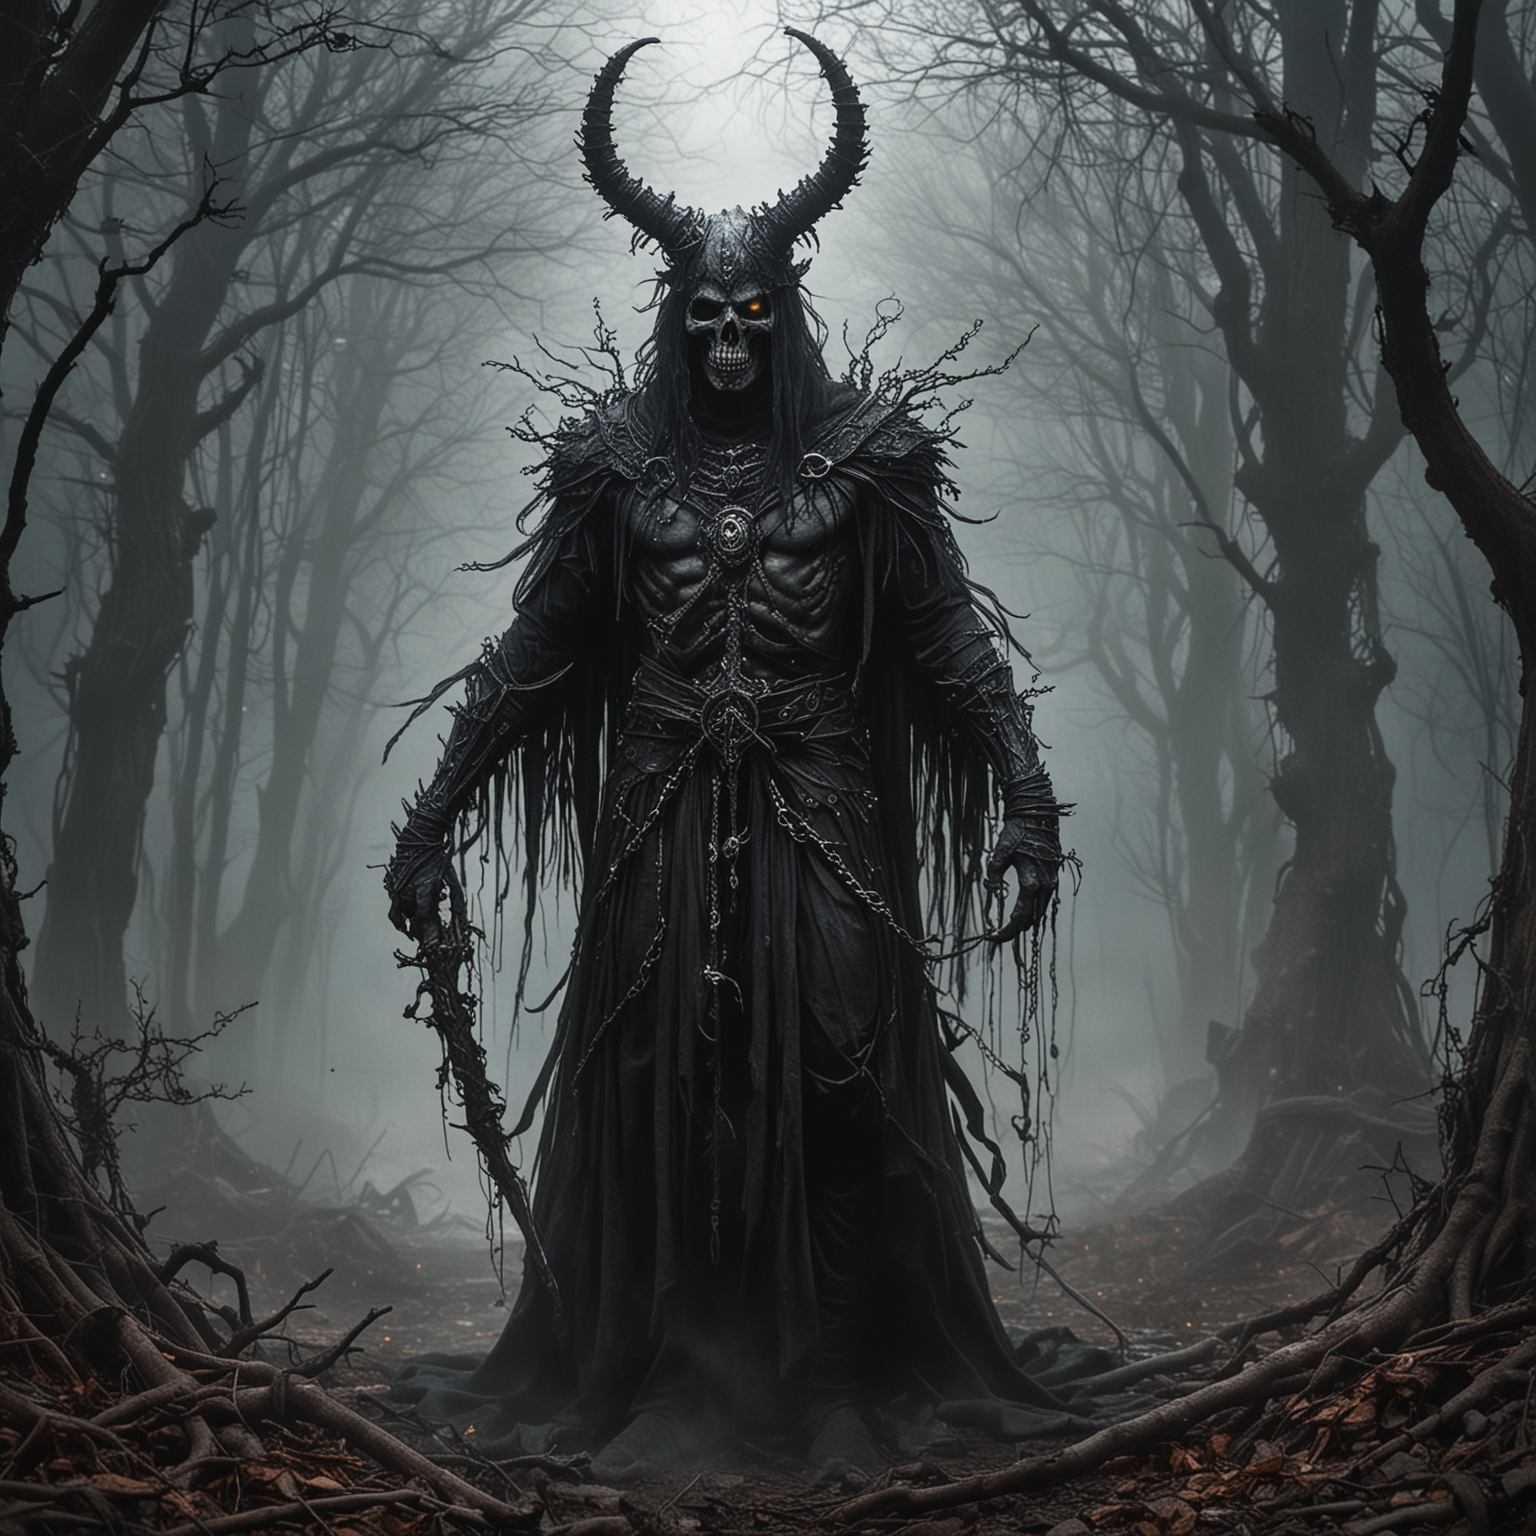 Necrothorn stands tall and imposing, his skeletal frame draped in tattered, dark robes that billow ominously around him. His gaunt visage is dominated by glowing, malevolent eyes that pierce through the darkness, casting an eerie greenish light. Strands of wispy, spectral energy emanate from his bony fingers, crackling with arcane power.

His skull, adorned with ancient runes and symbols of necromantic mastery, radiates an aura of dread and decay. Jagged horns protrude from the sides of his skull, adding to his sinister appearance. Wisps of dark mist coil around him, hinting at the necrotic energies that course through his undead form.

Around his neck hangs an amulet, pulsating with dark energy and serving as a focal point for his sinister spells. Chains of shadowy essence wrap around his body, binding the remnants of his mortal existence to the dark forces that sustain him.

With every step, the ground seems to wither and decay beneath his feet, marking his presence with a trail of death and desolation. Necrothorn exudes an aura of ancient malevolence, a harbinger of doom and despair to all who dare to oppose him in combat.